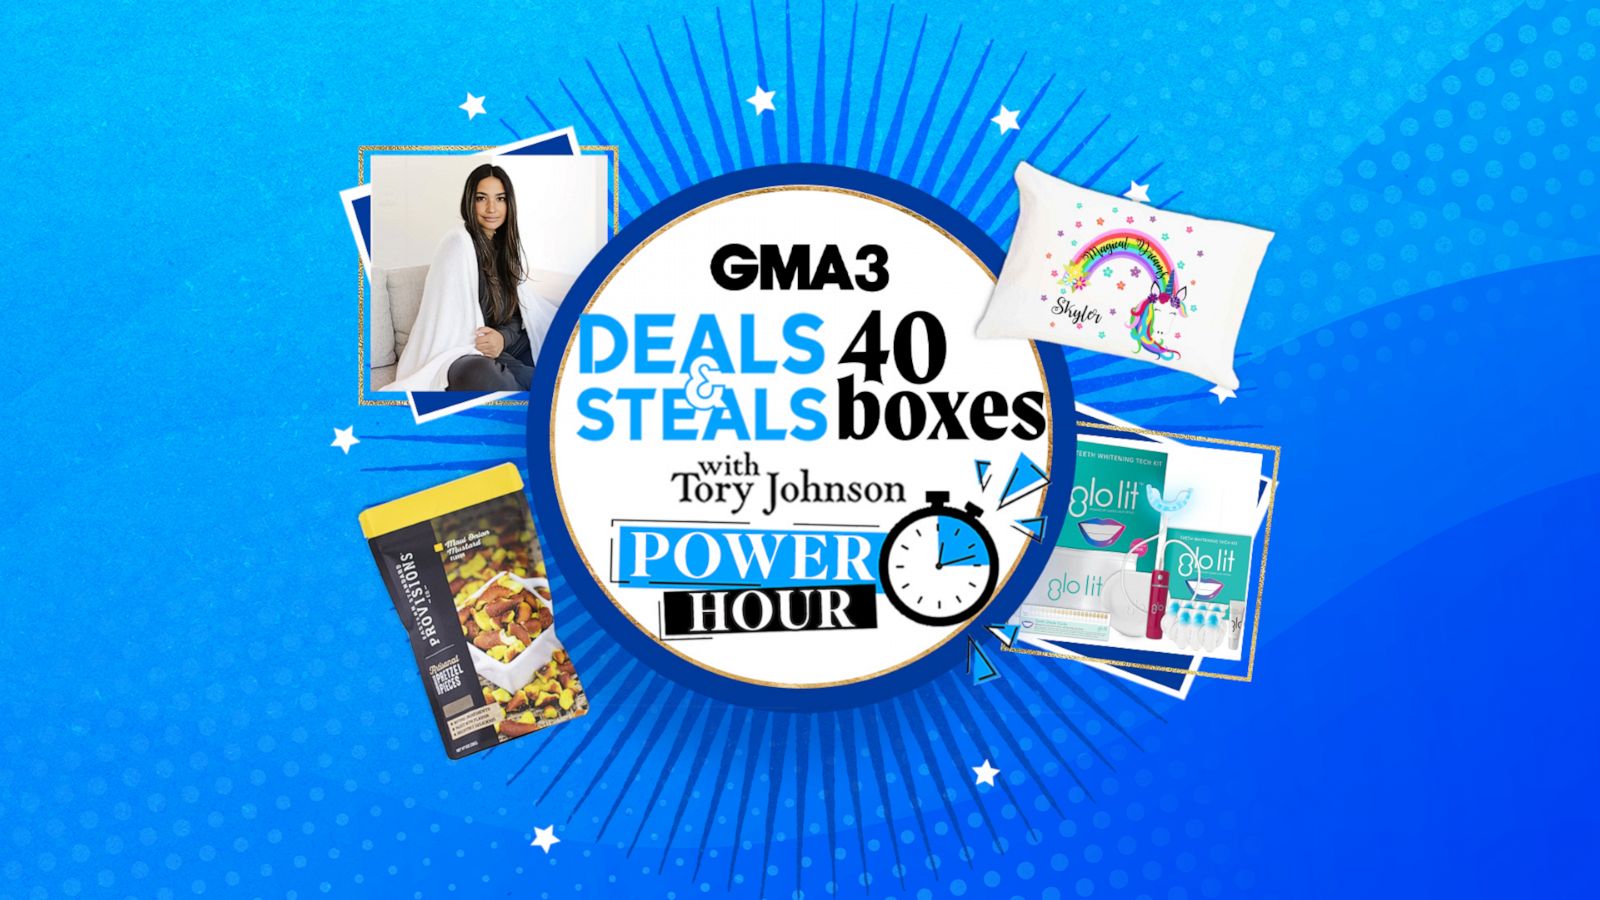 Final day to save on SkinLab Trilogy Wand and more 'GMA3' Power Hour deals  - Good Morning America